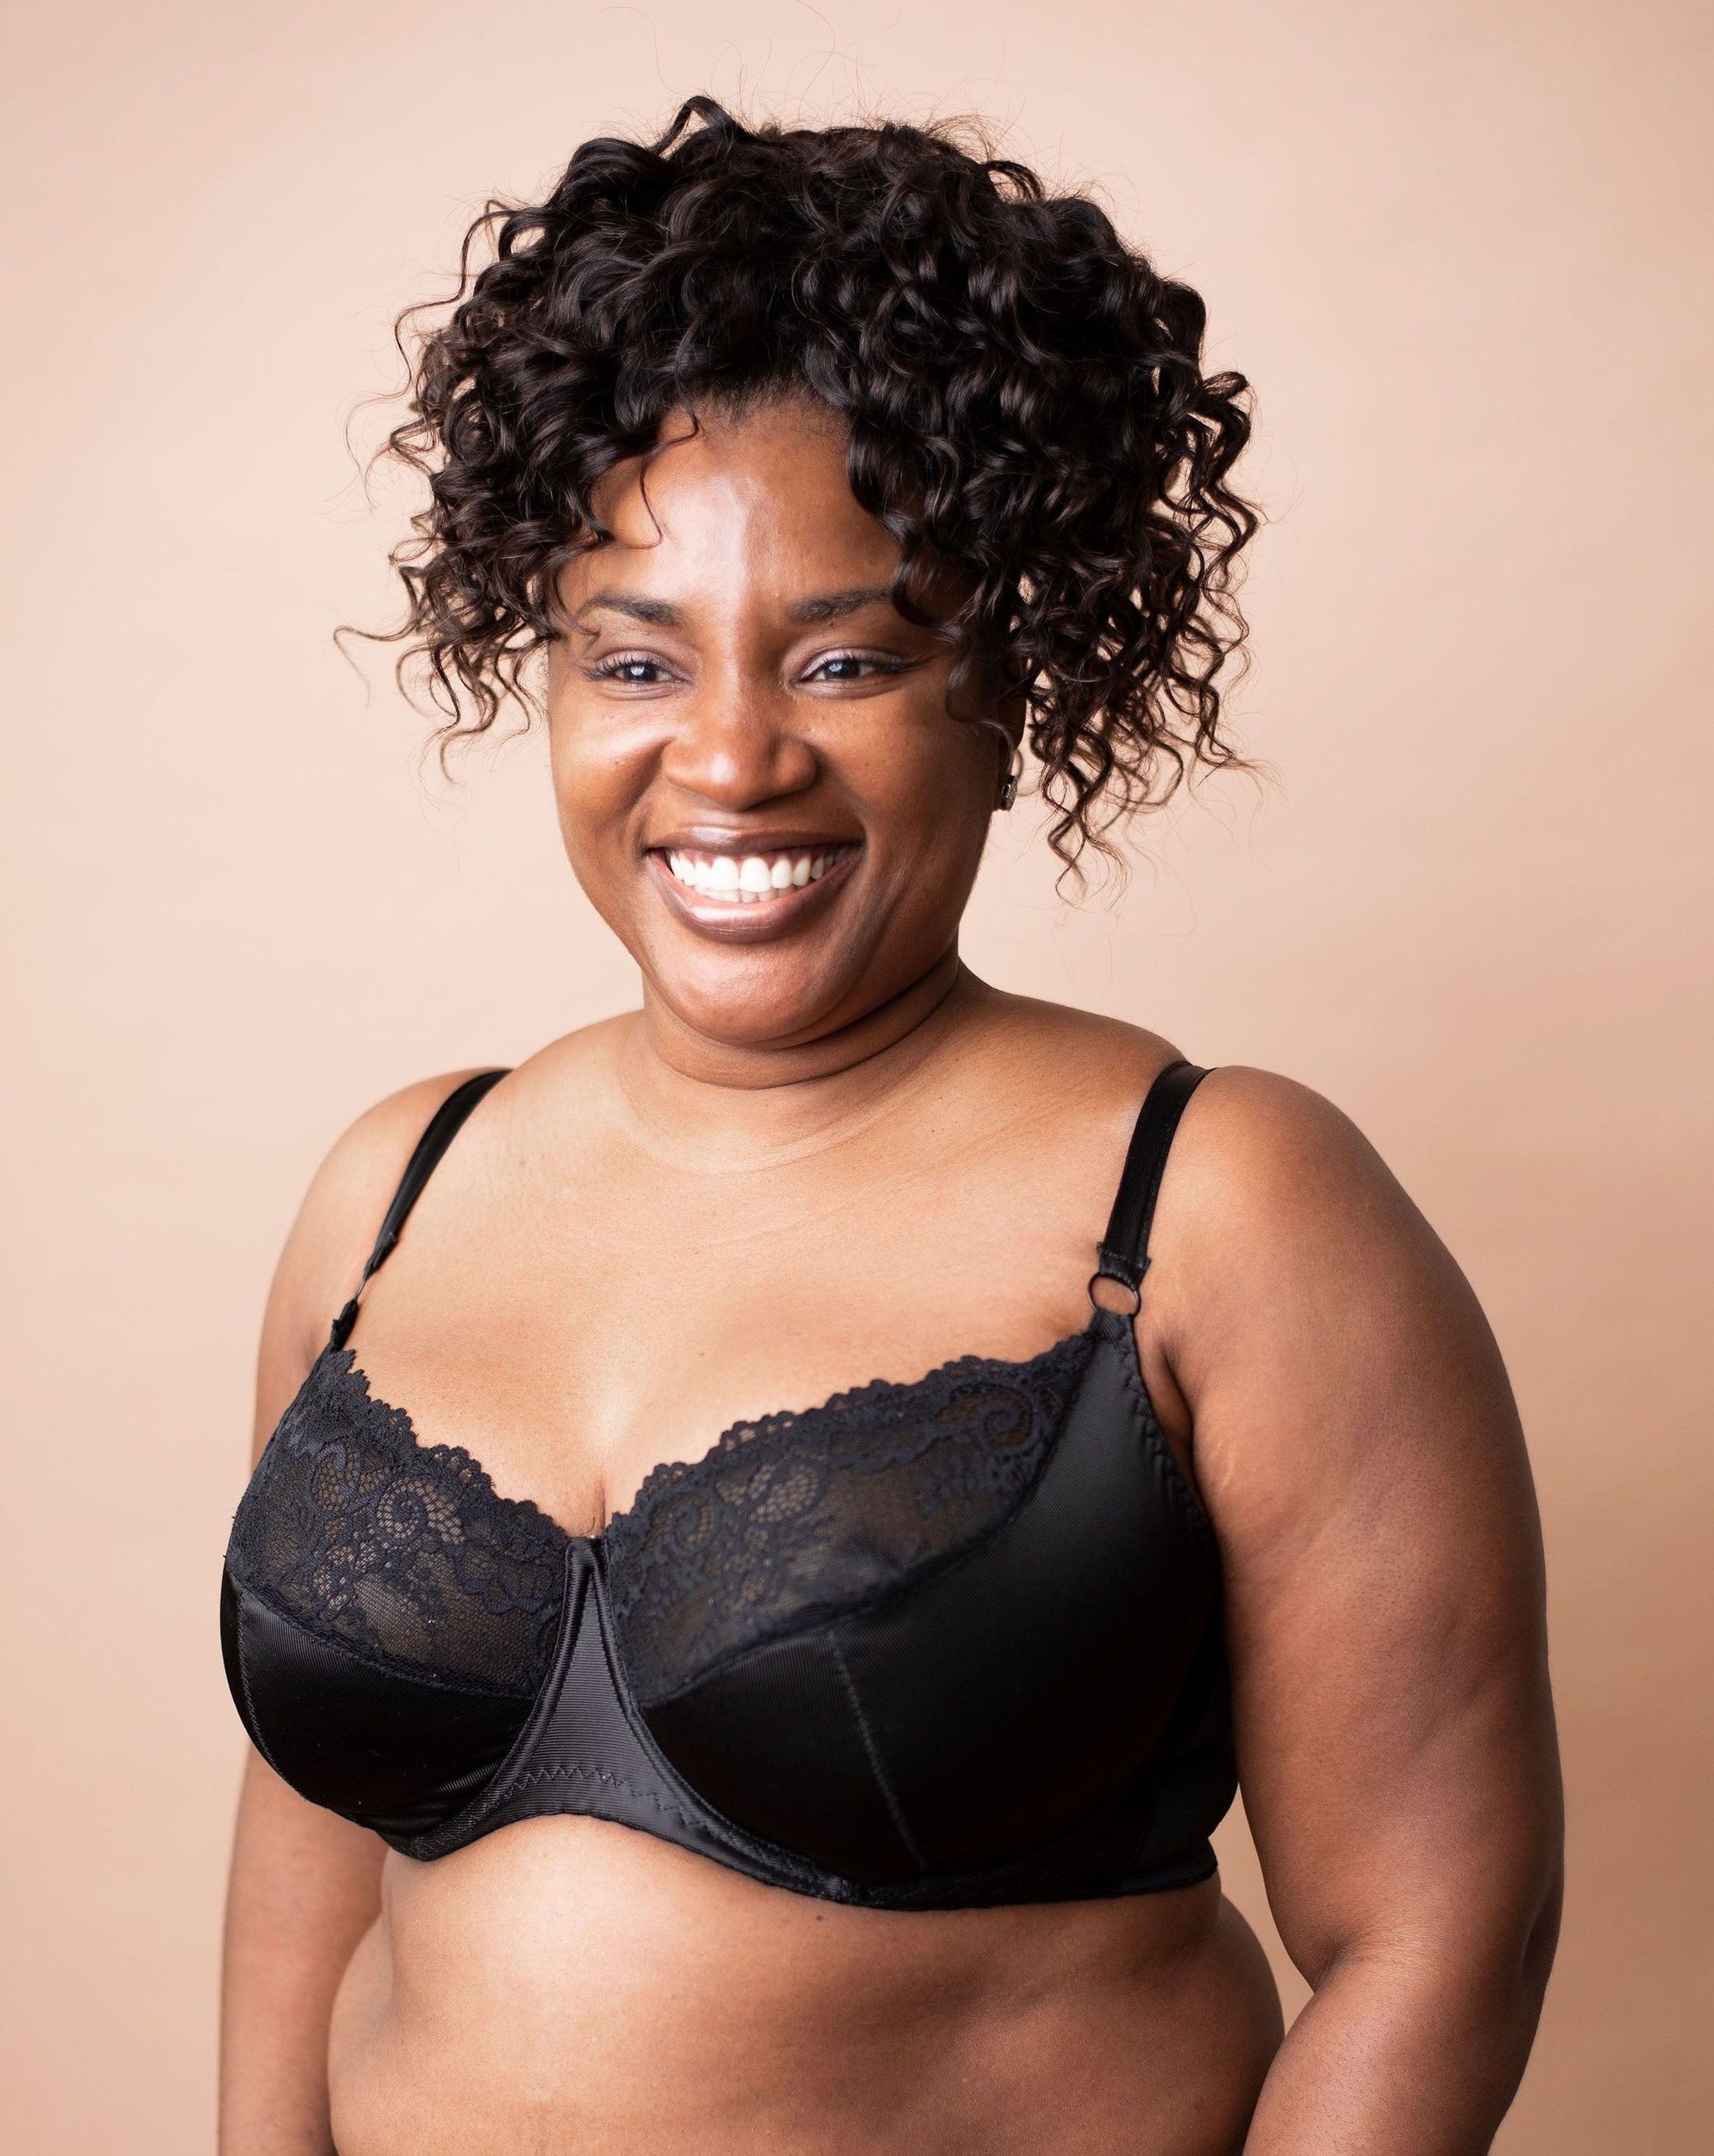 Model with dark curly hair is wearing a custom black wired bra. Half body frontal shot in front of a copper background.